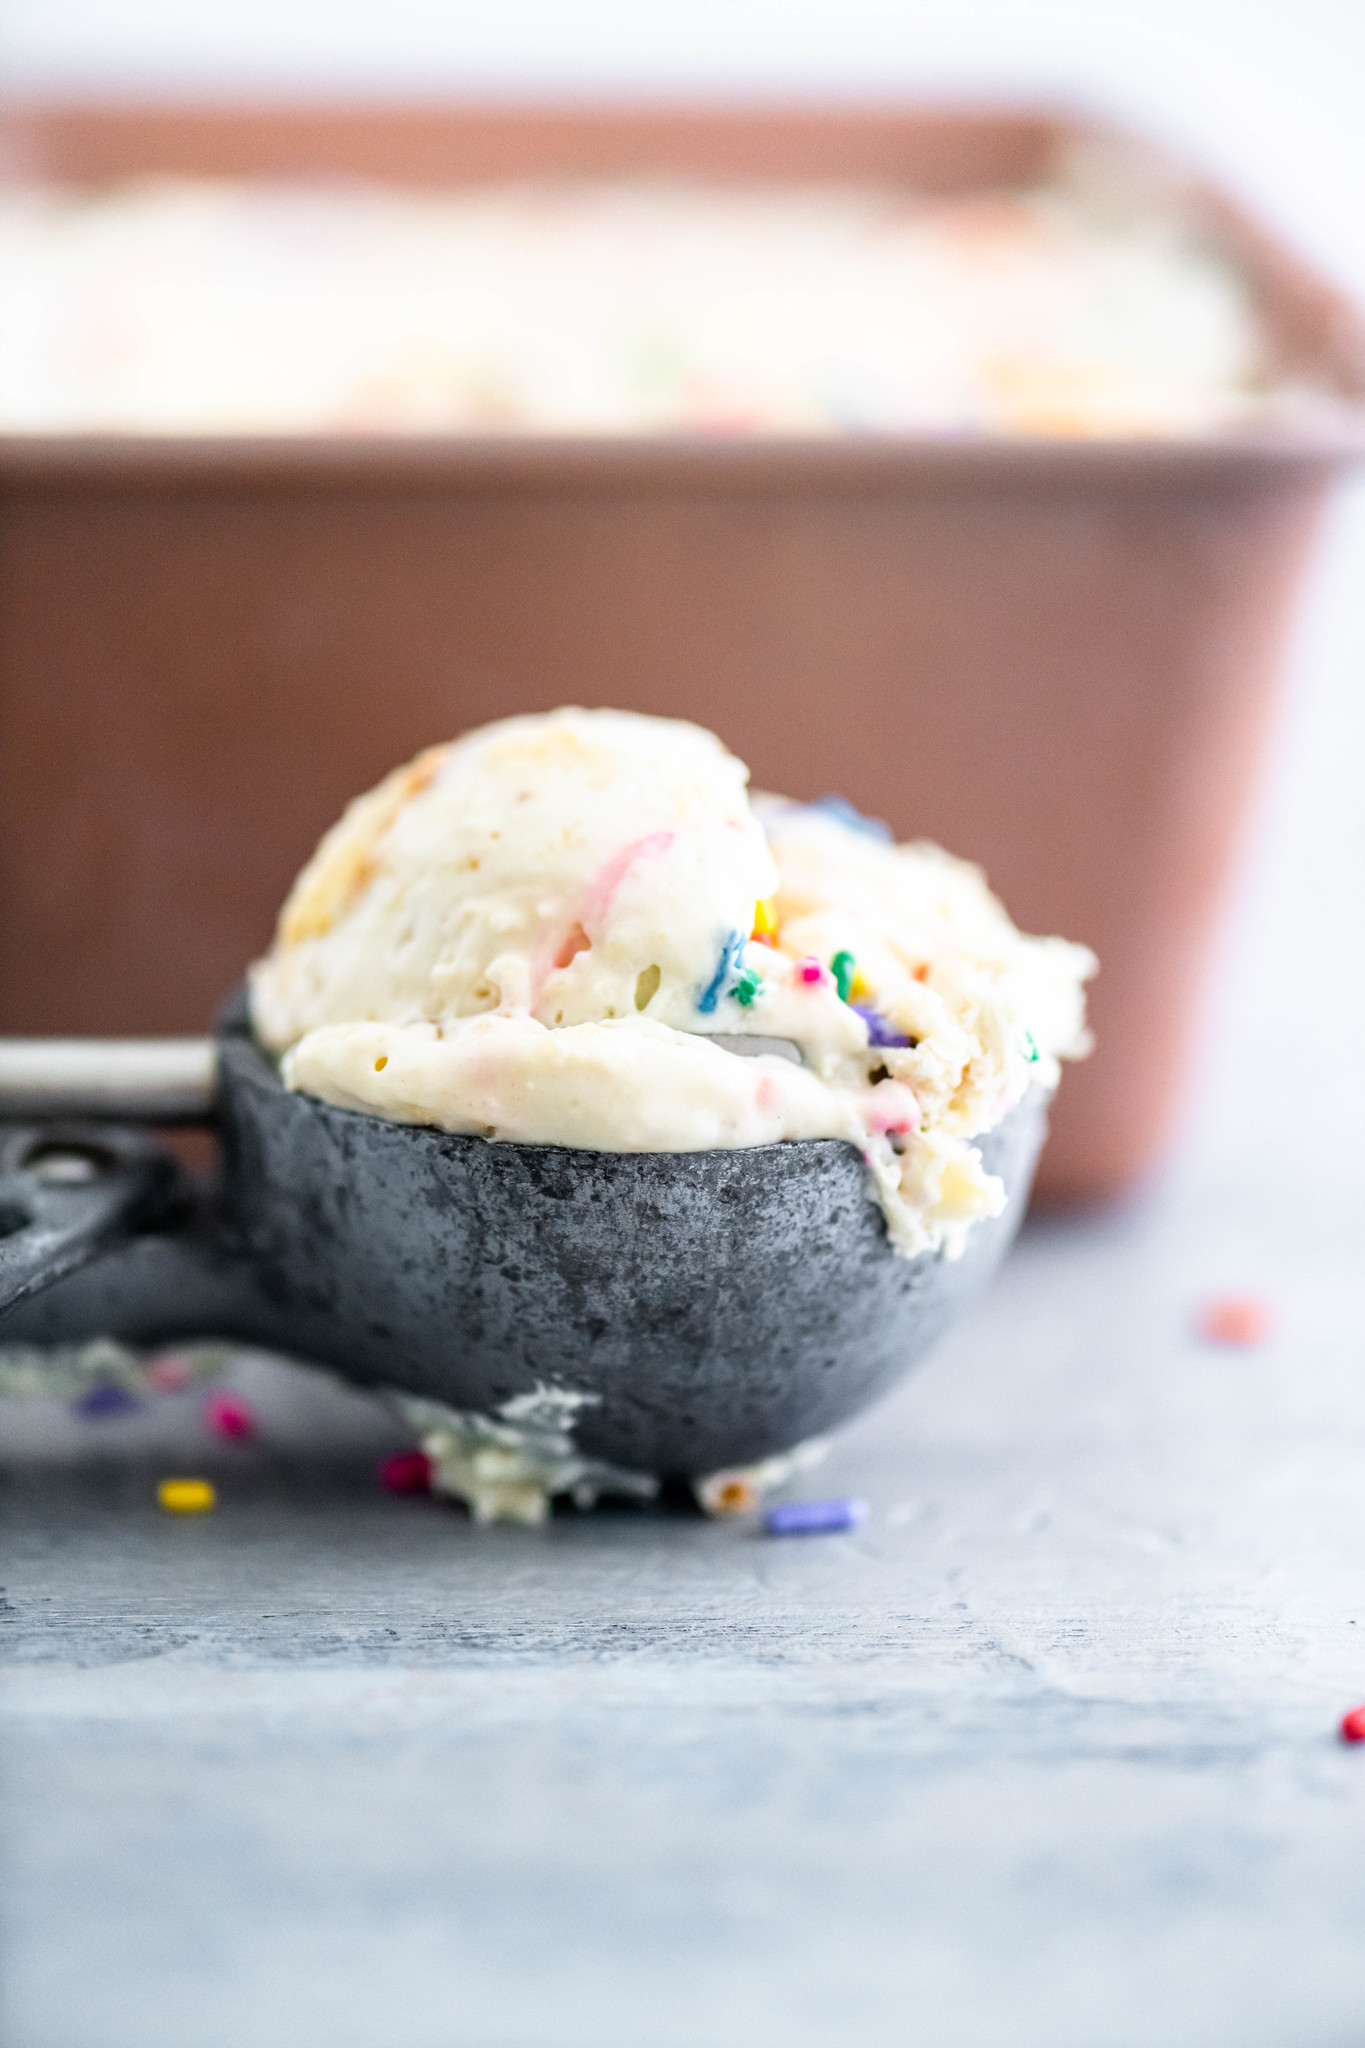 Scoop of cake batter ice cream in an old fashioned ice cream scoop.